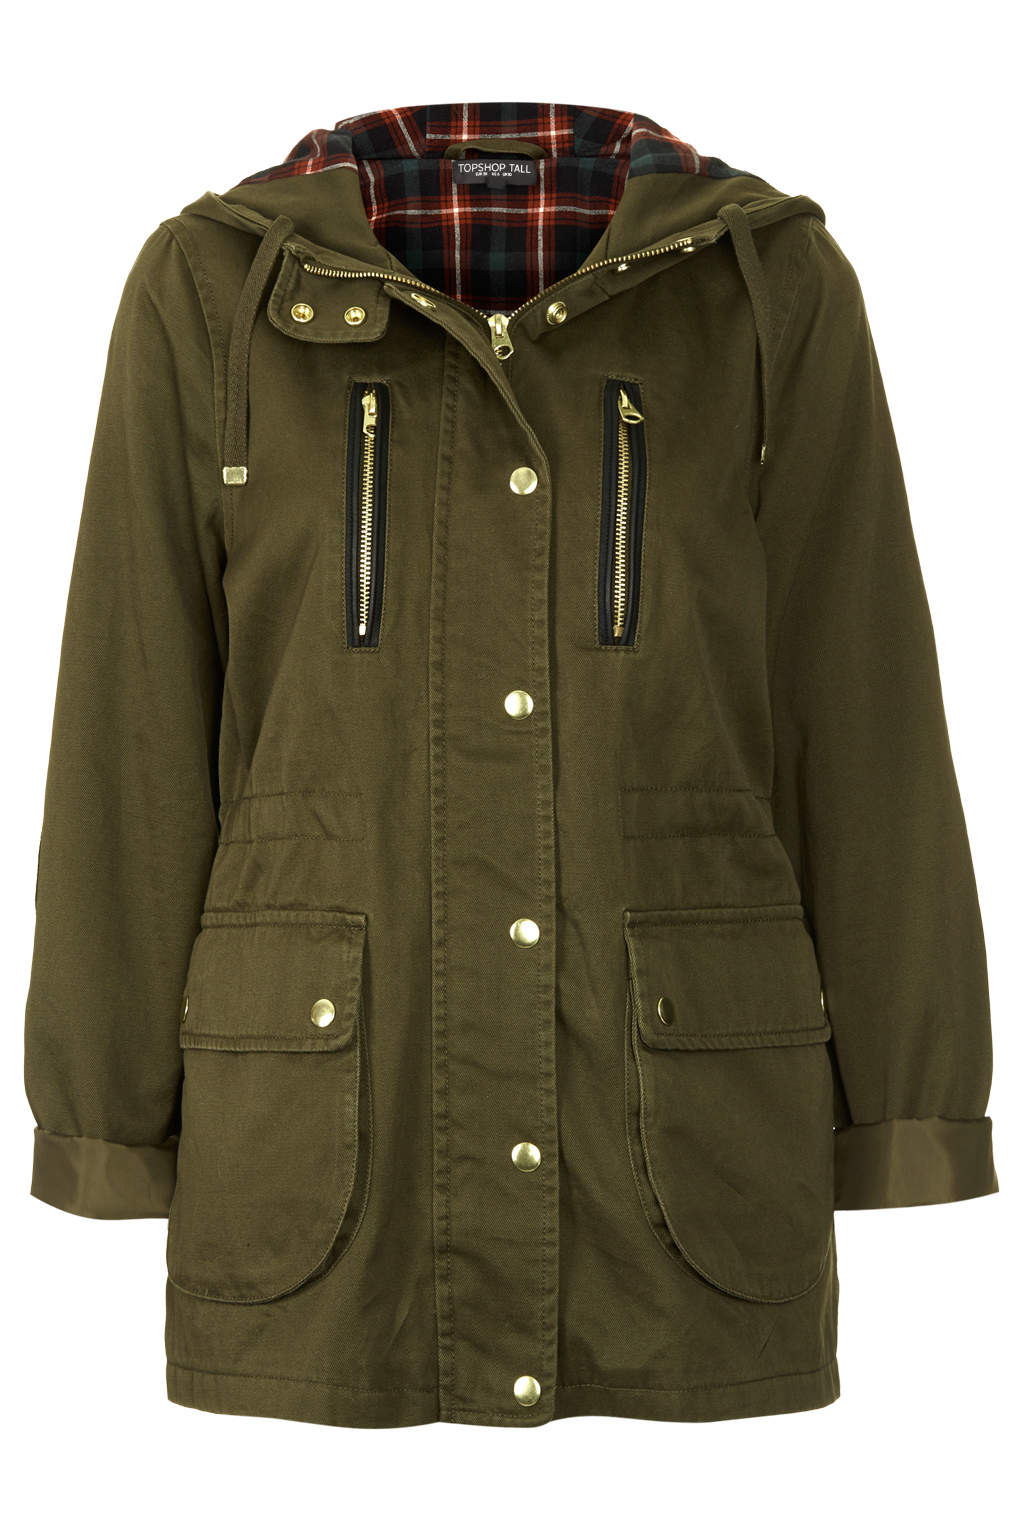 Lyst - Topshop Tall Hooded Lightweight Jacket in Green